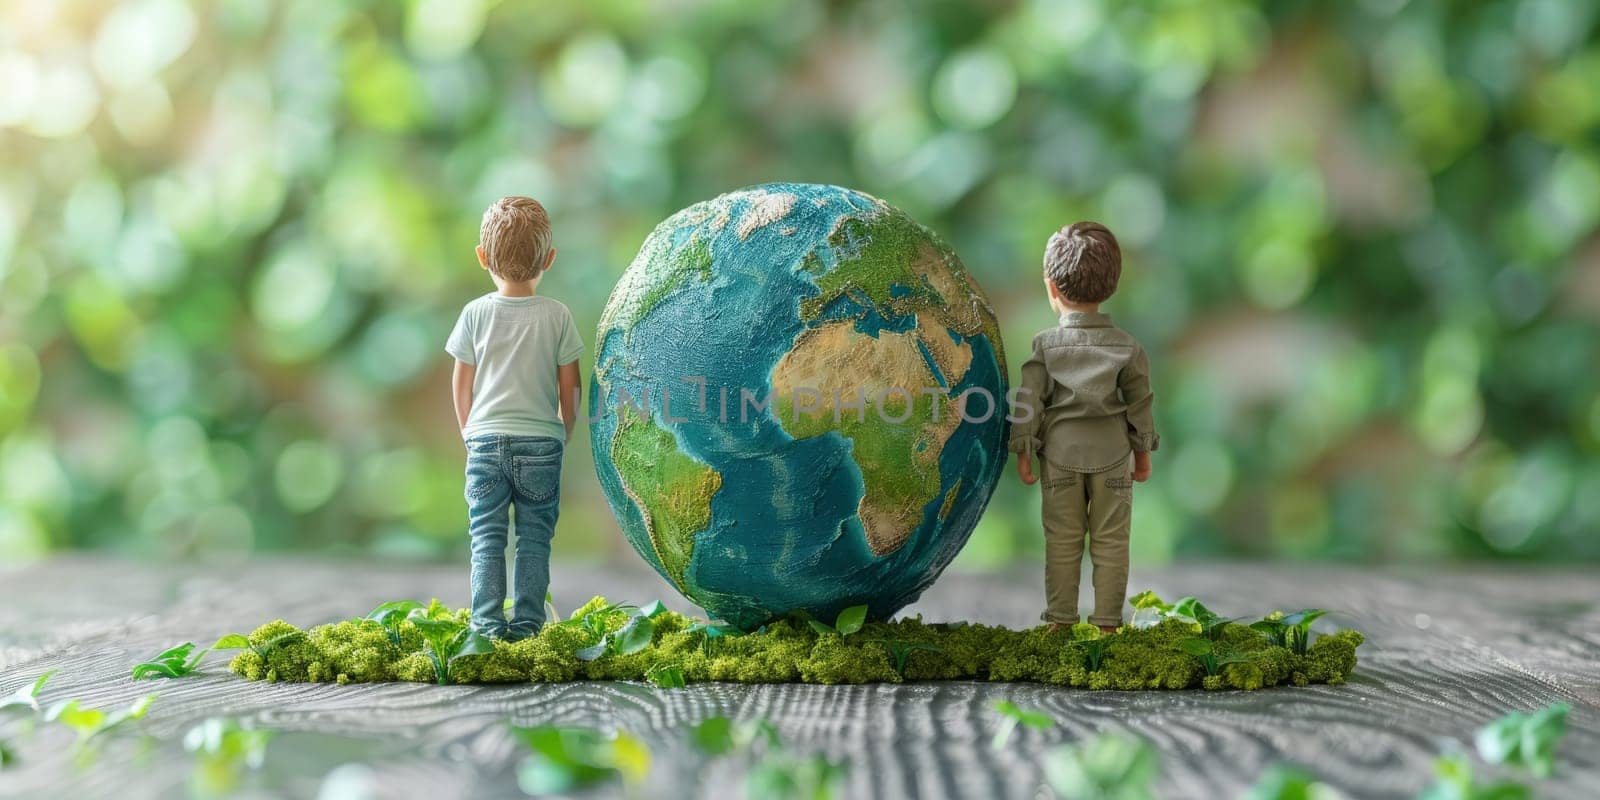 Children figurines standing beside large globe on tree stump. Concept of environmental awareness, sustainability, and protecting nature for future generations. by ailike